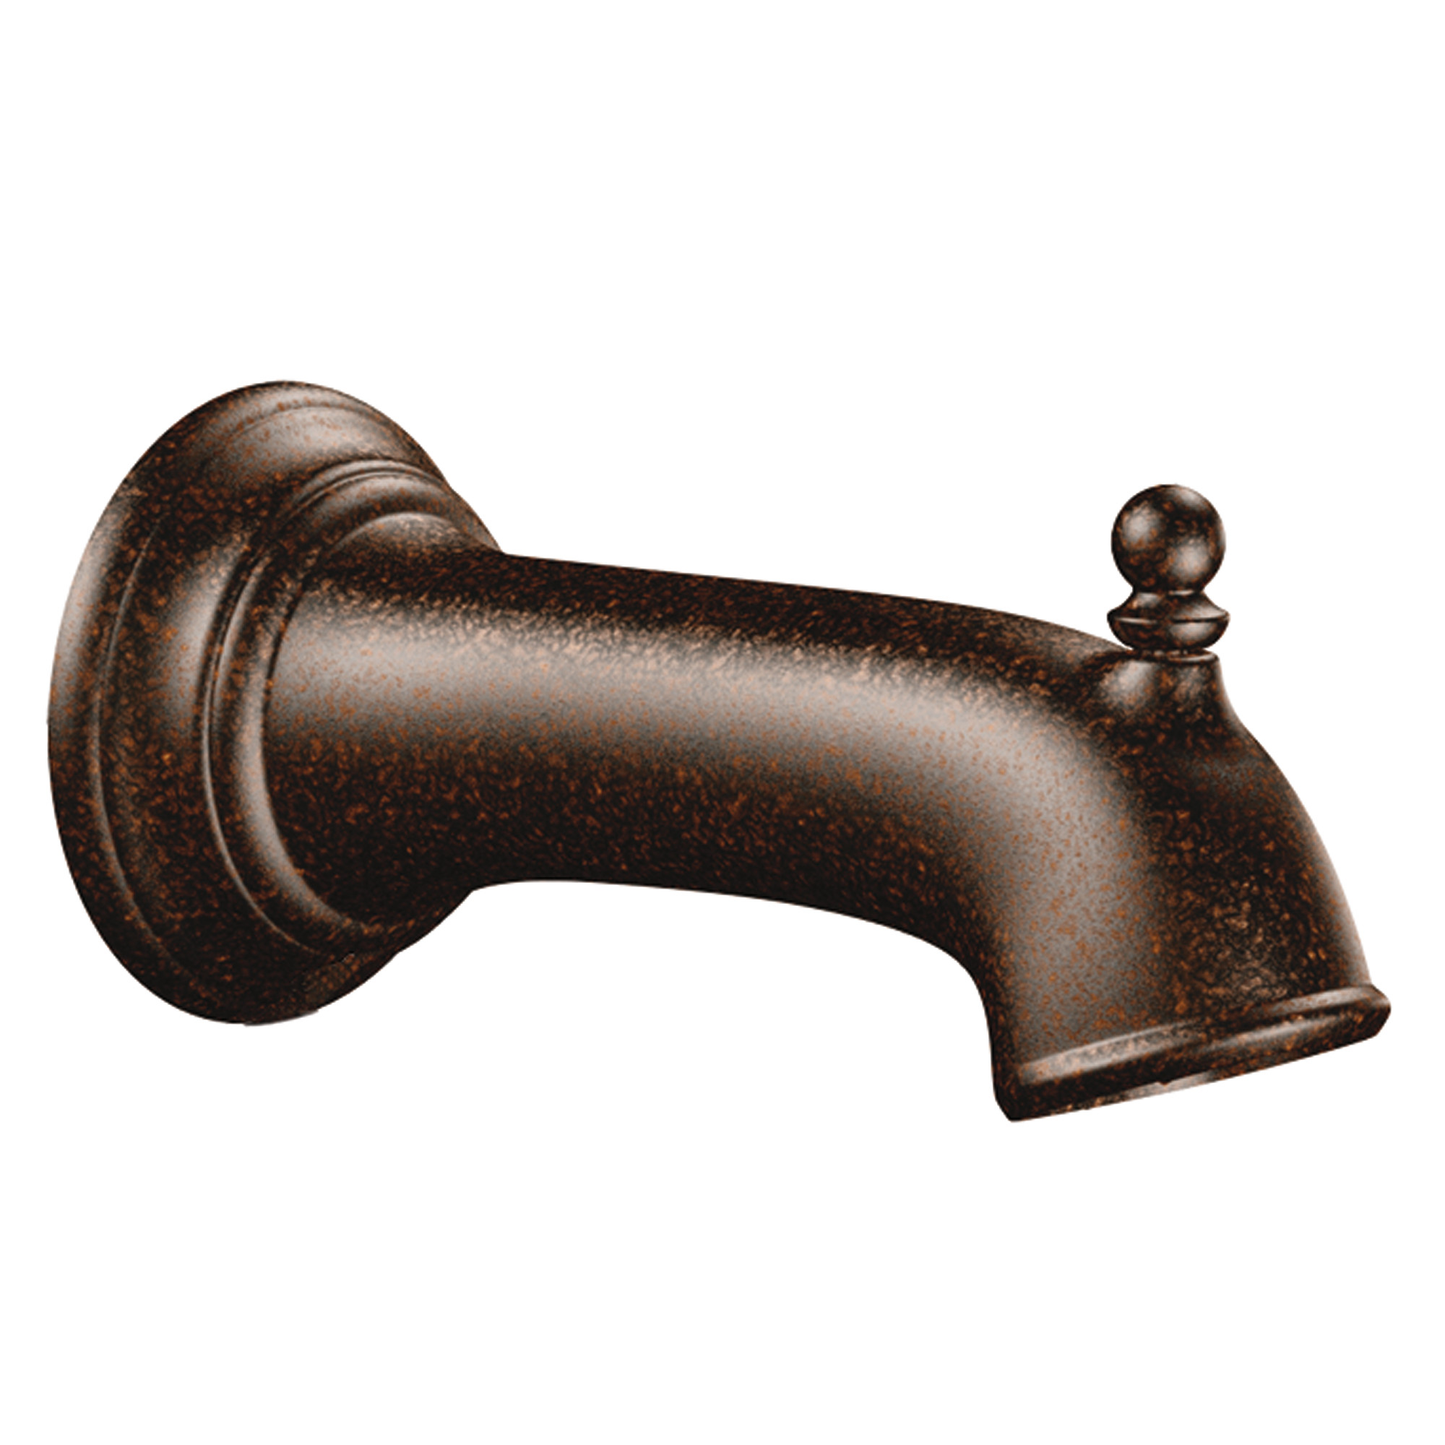 Moen 7 1/4" Tub Spout With 1/2" Slip Fit Connection From The Brantford Collection (11.75"l X 5.88"w X 3.69"h)